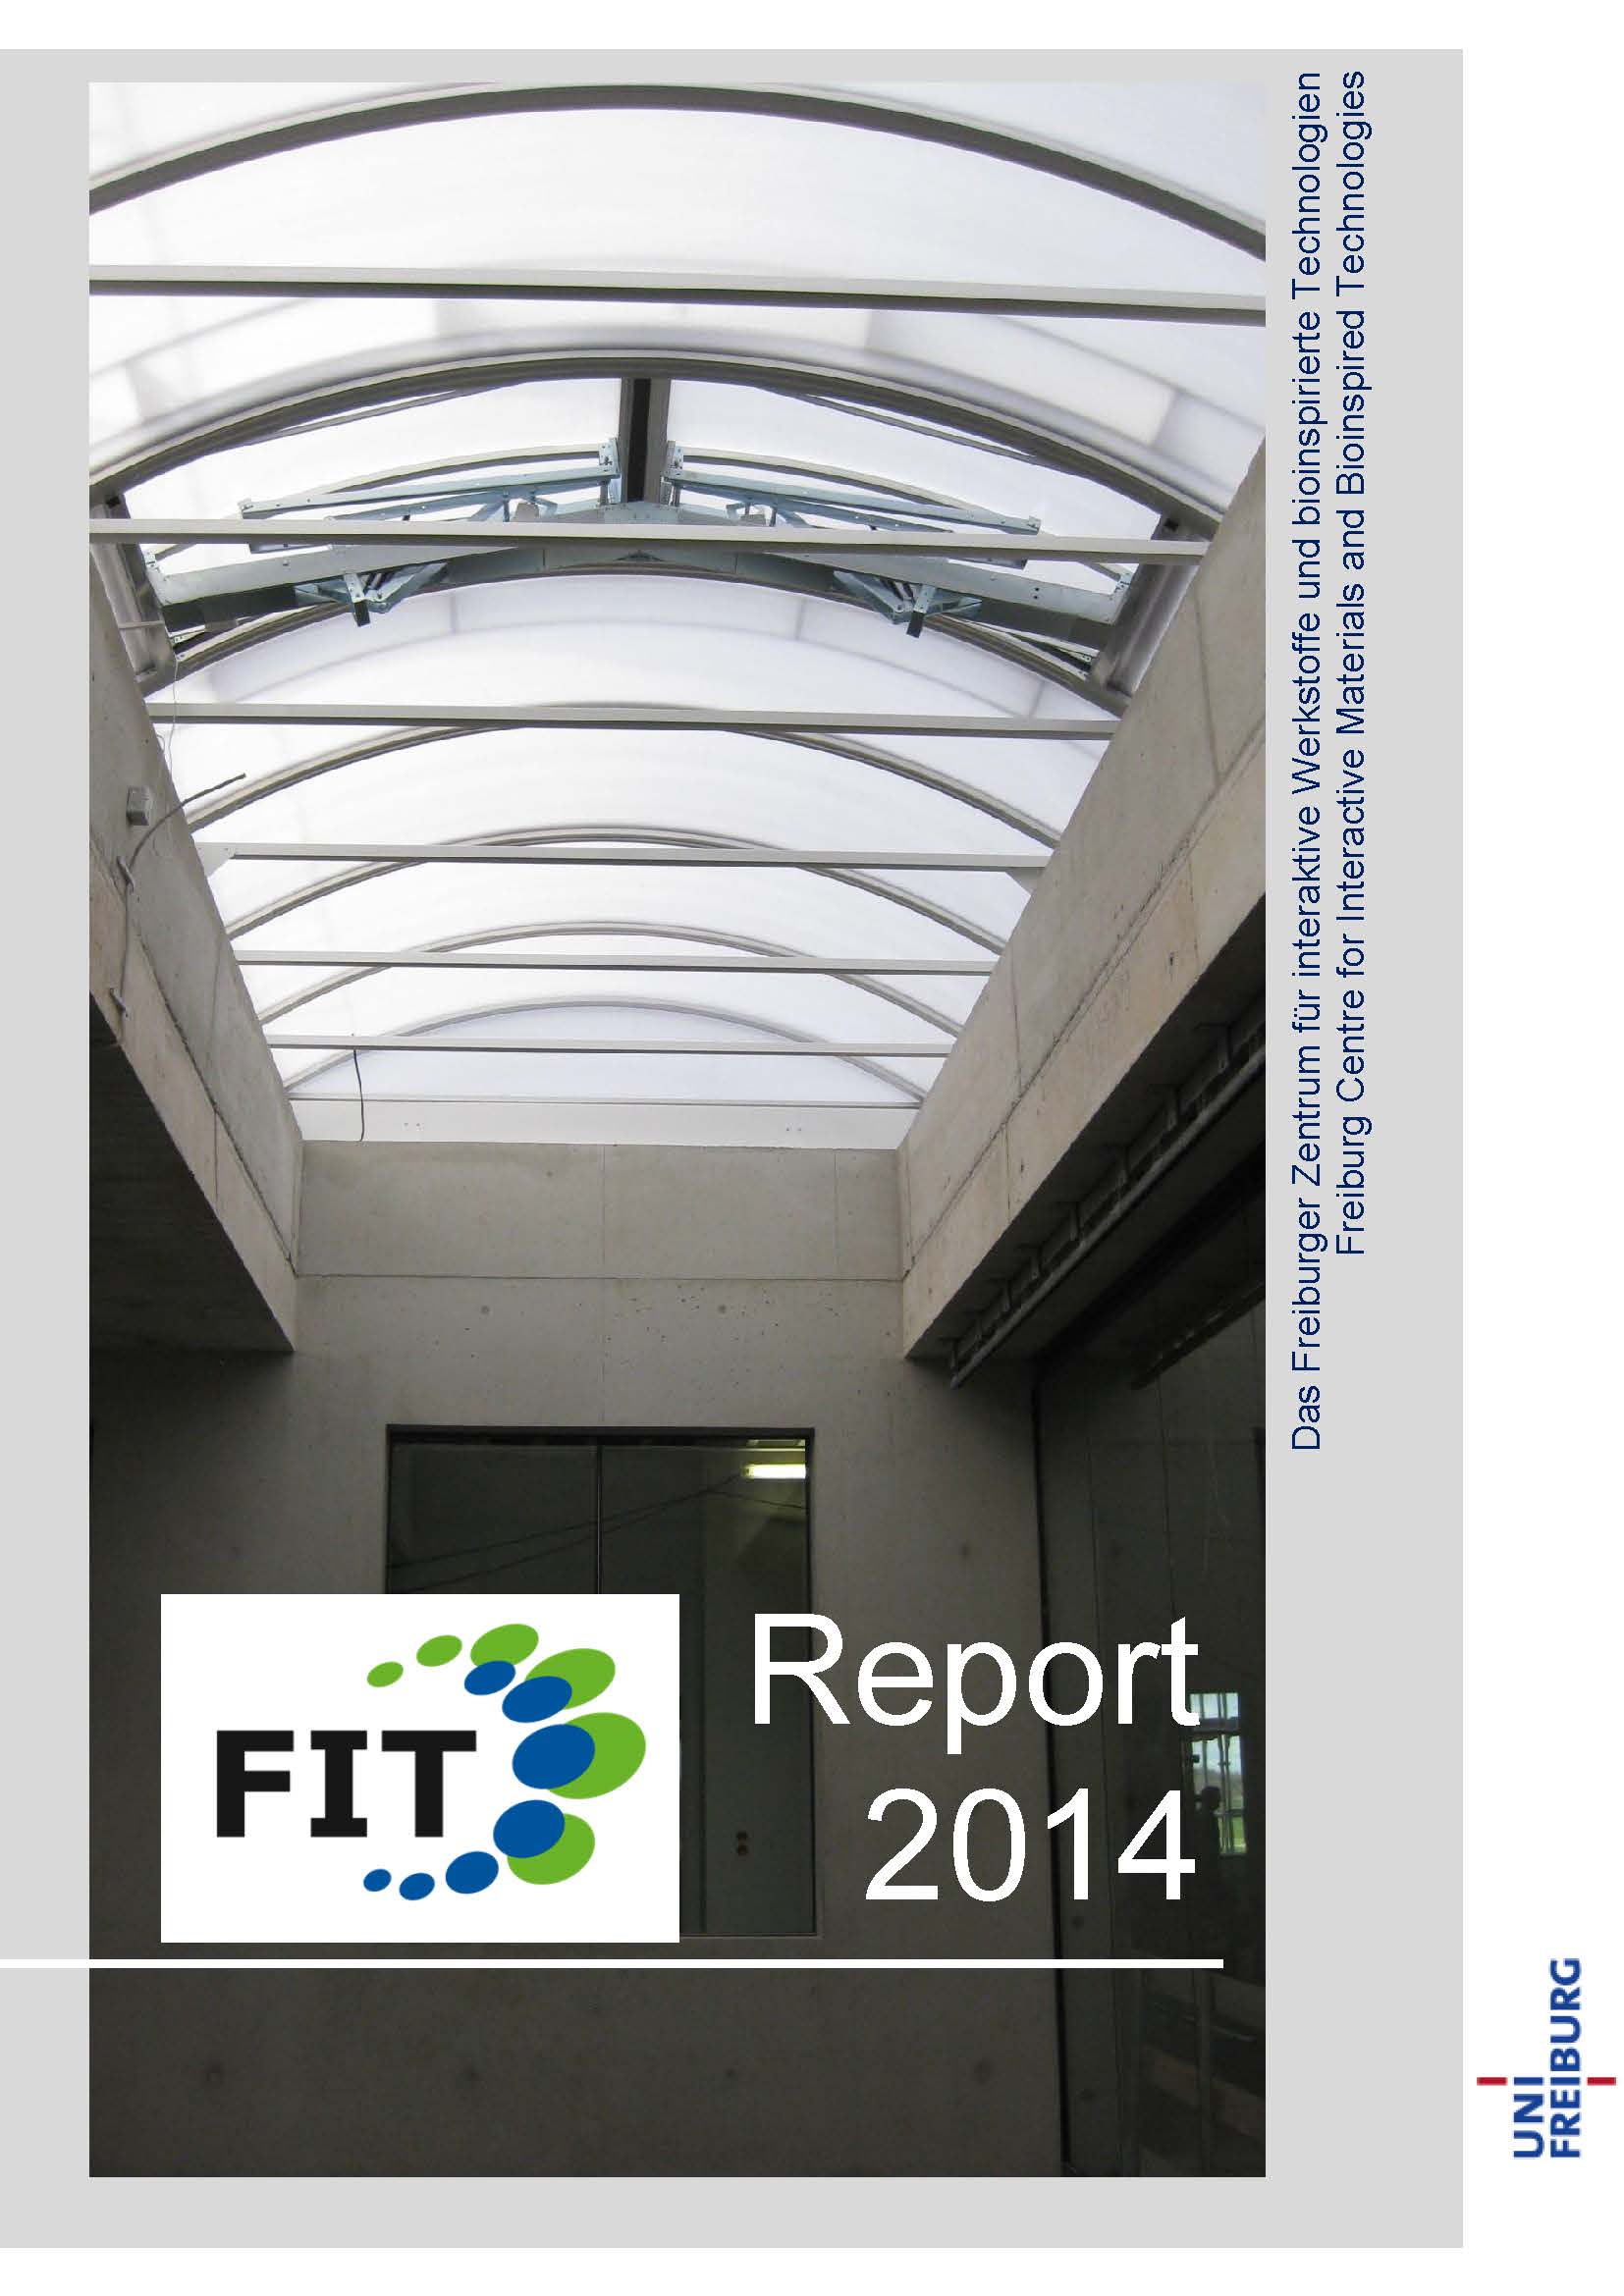 FIT-Report 2014 published